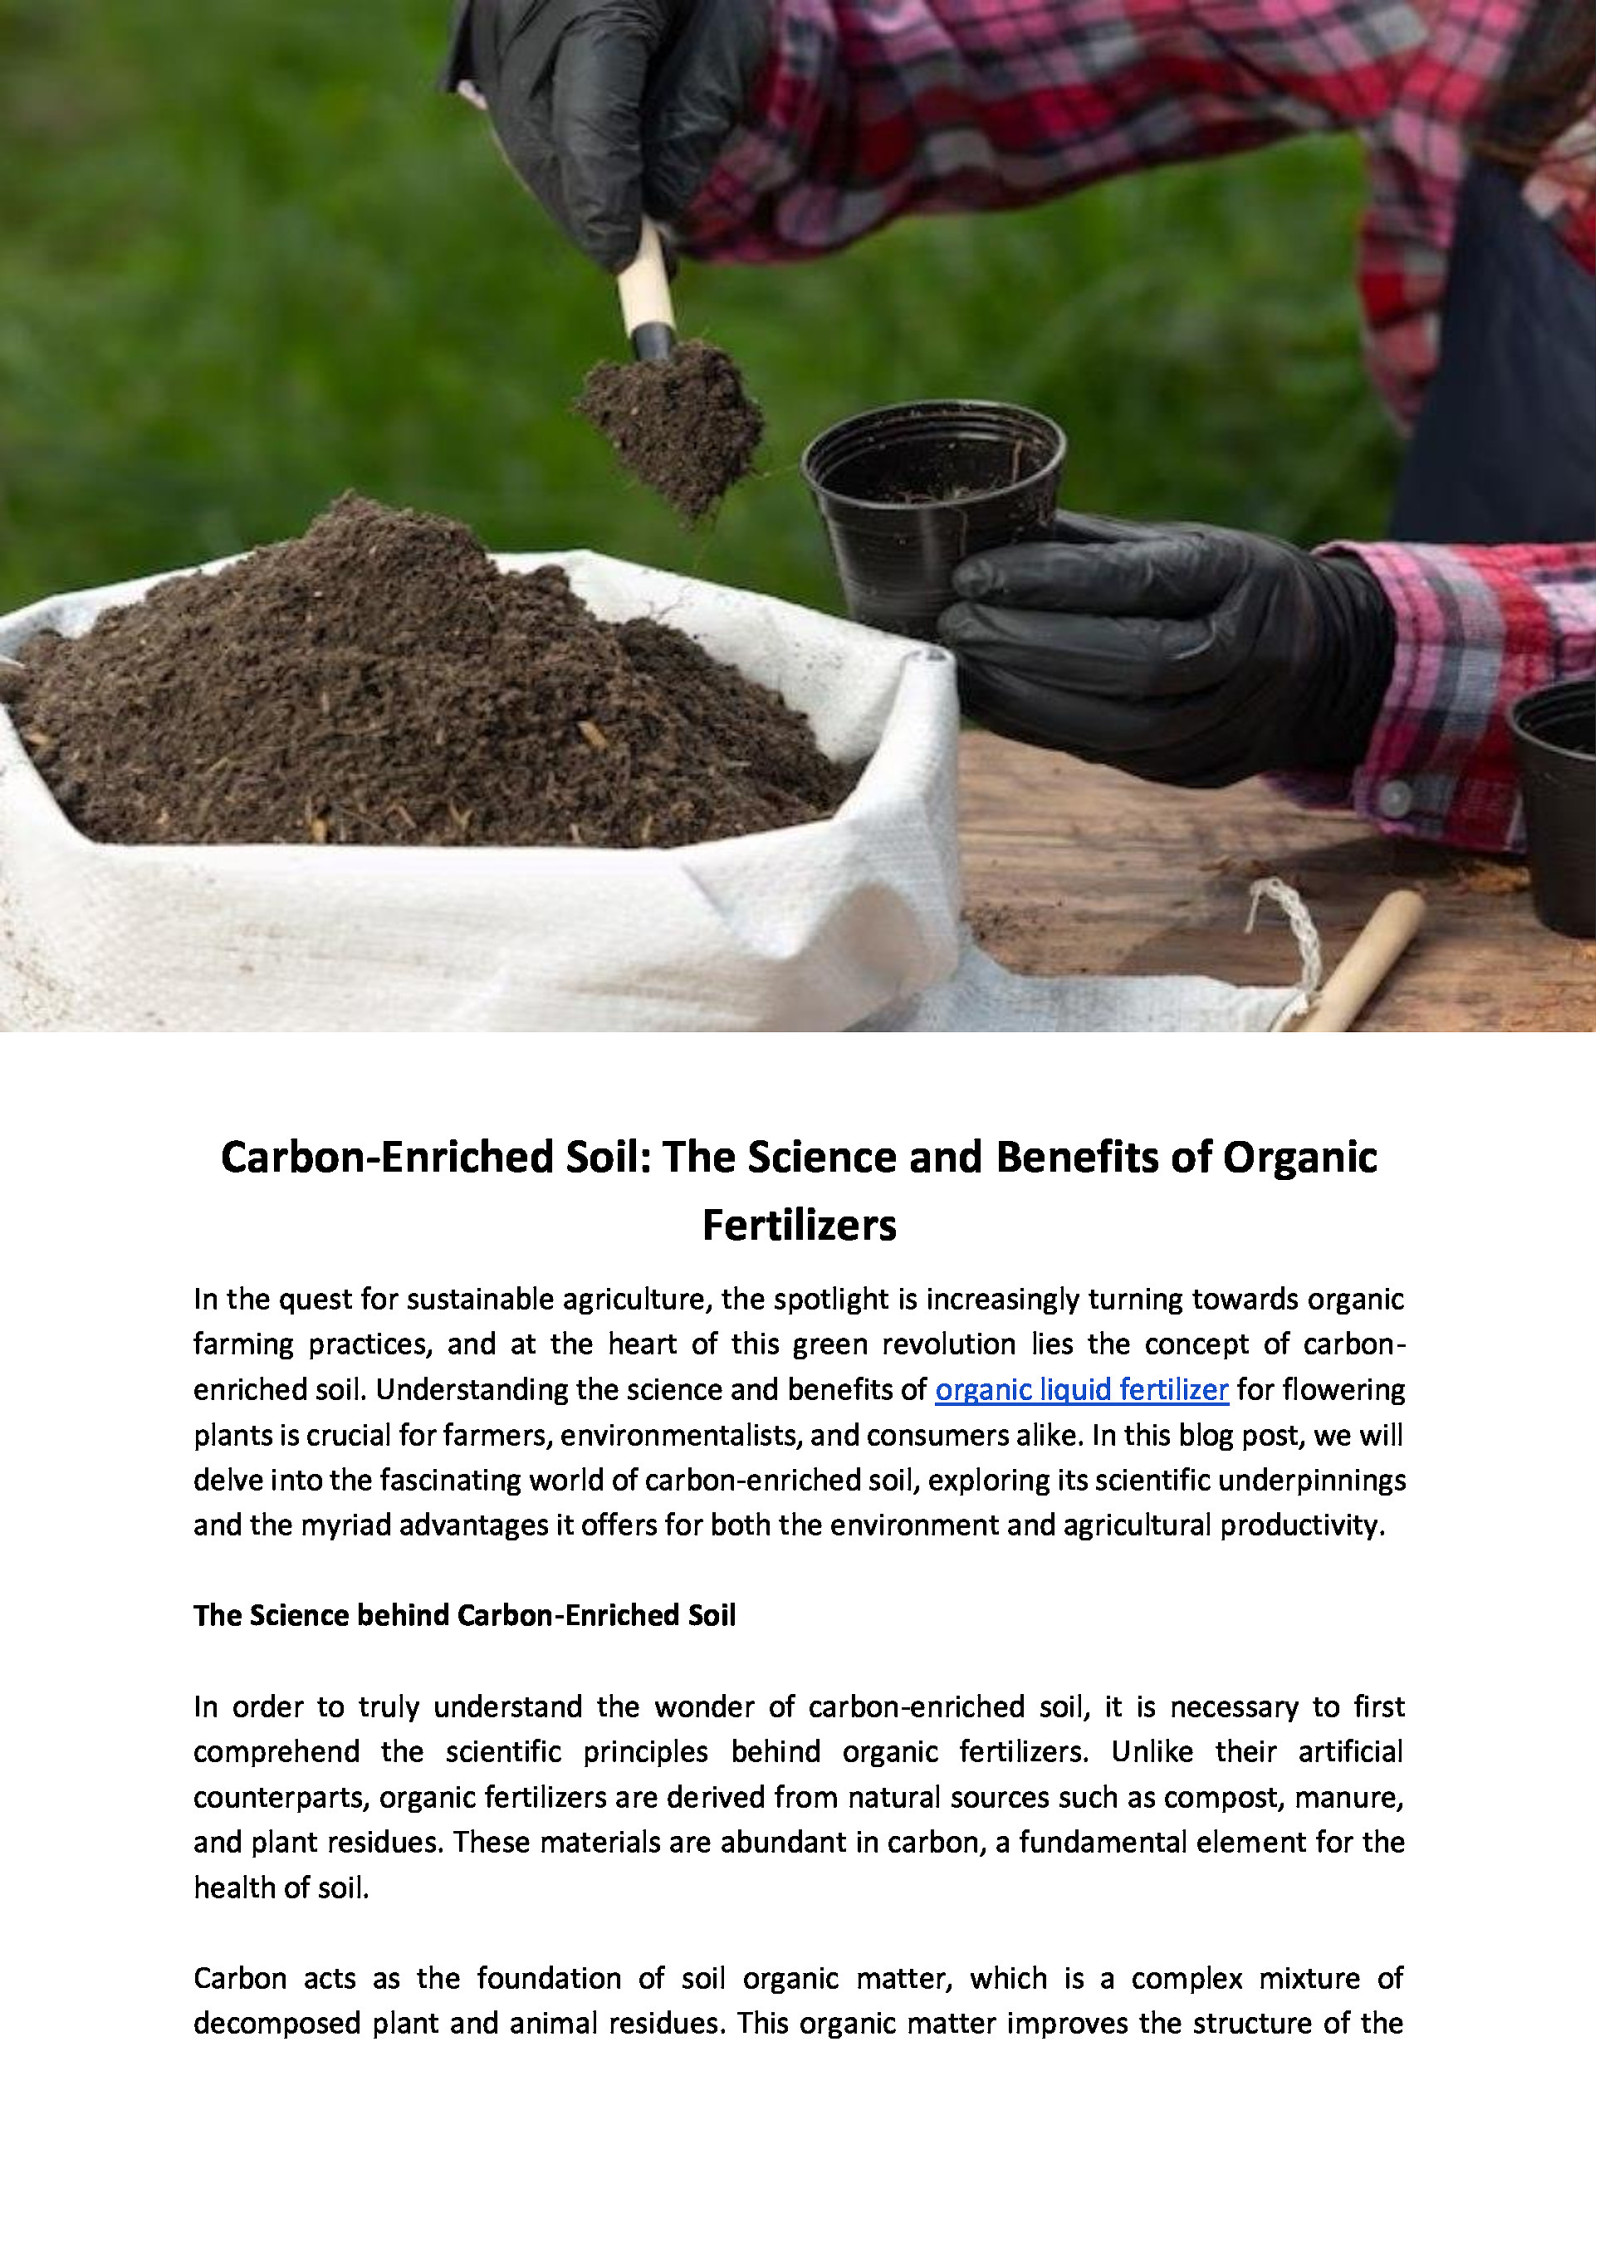 Carbon-Enriched Soil: The Science and Benefits of Organic Fertilizers